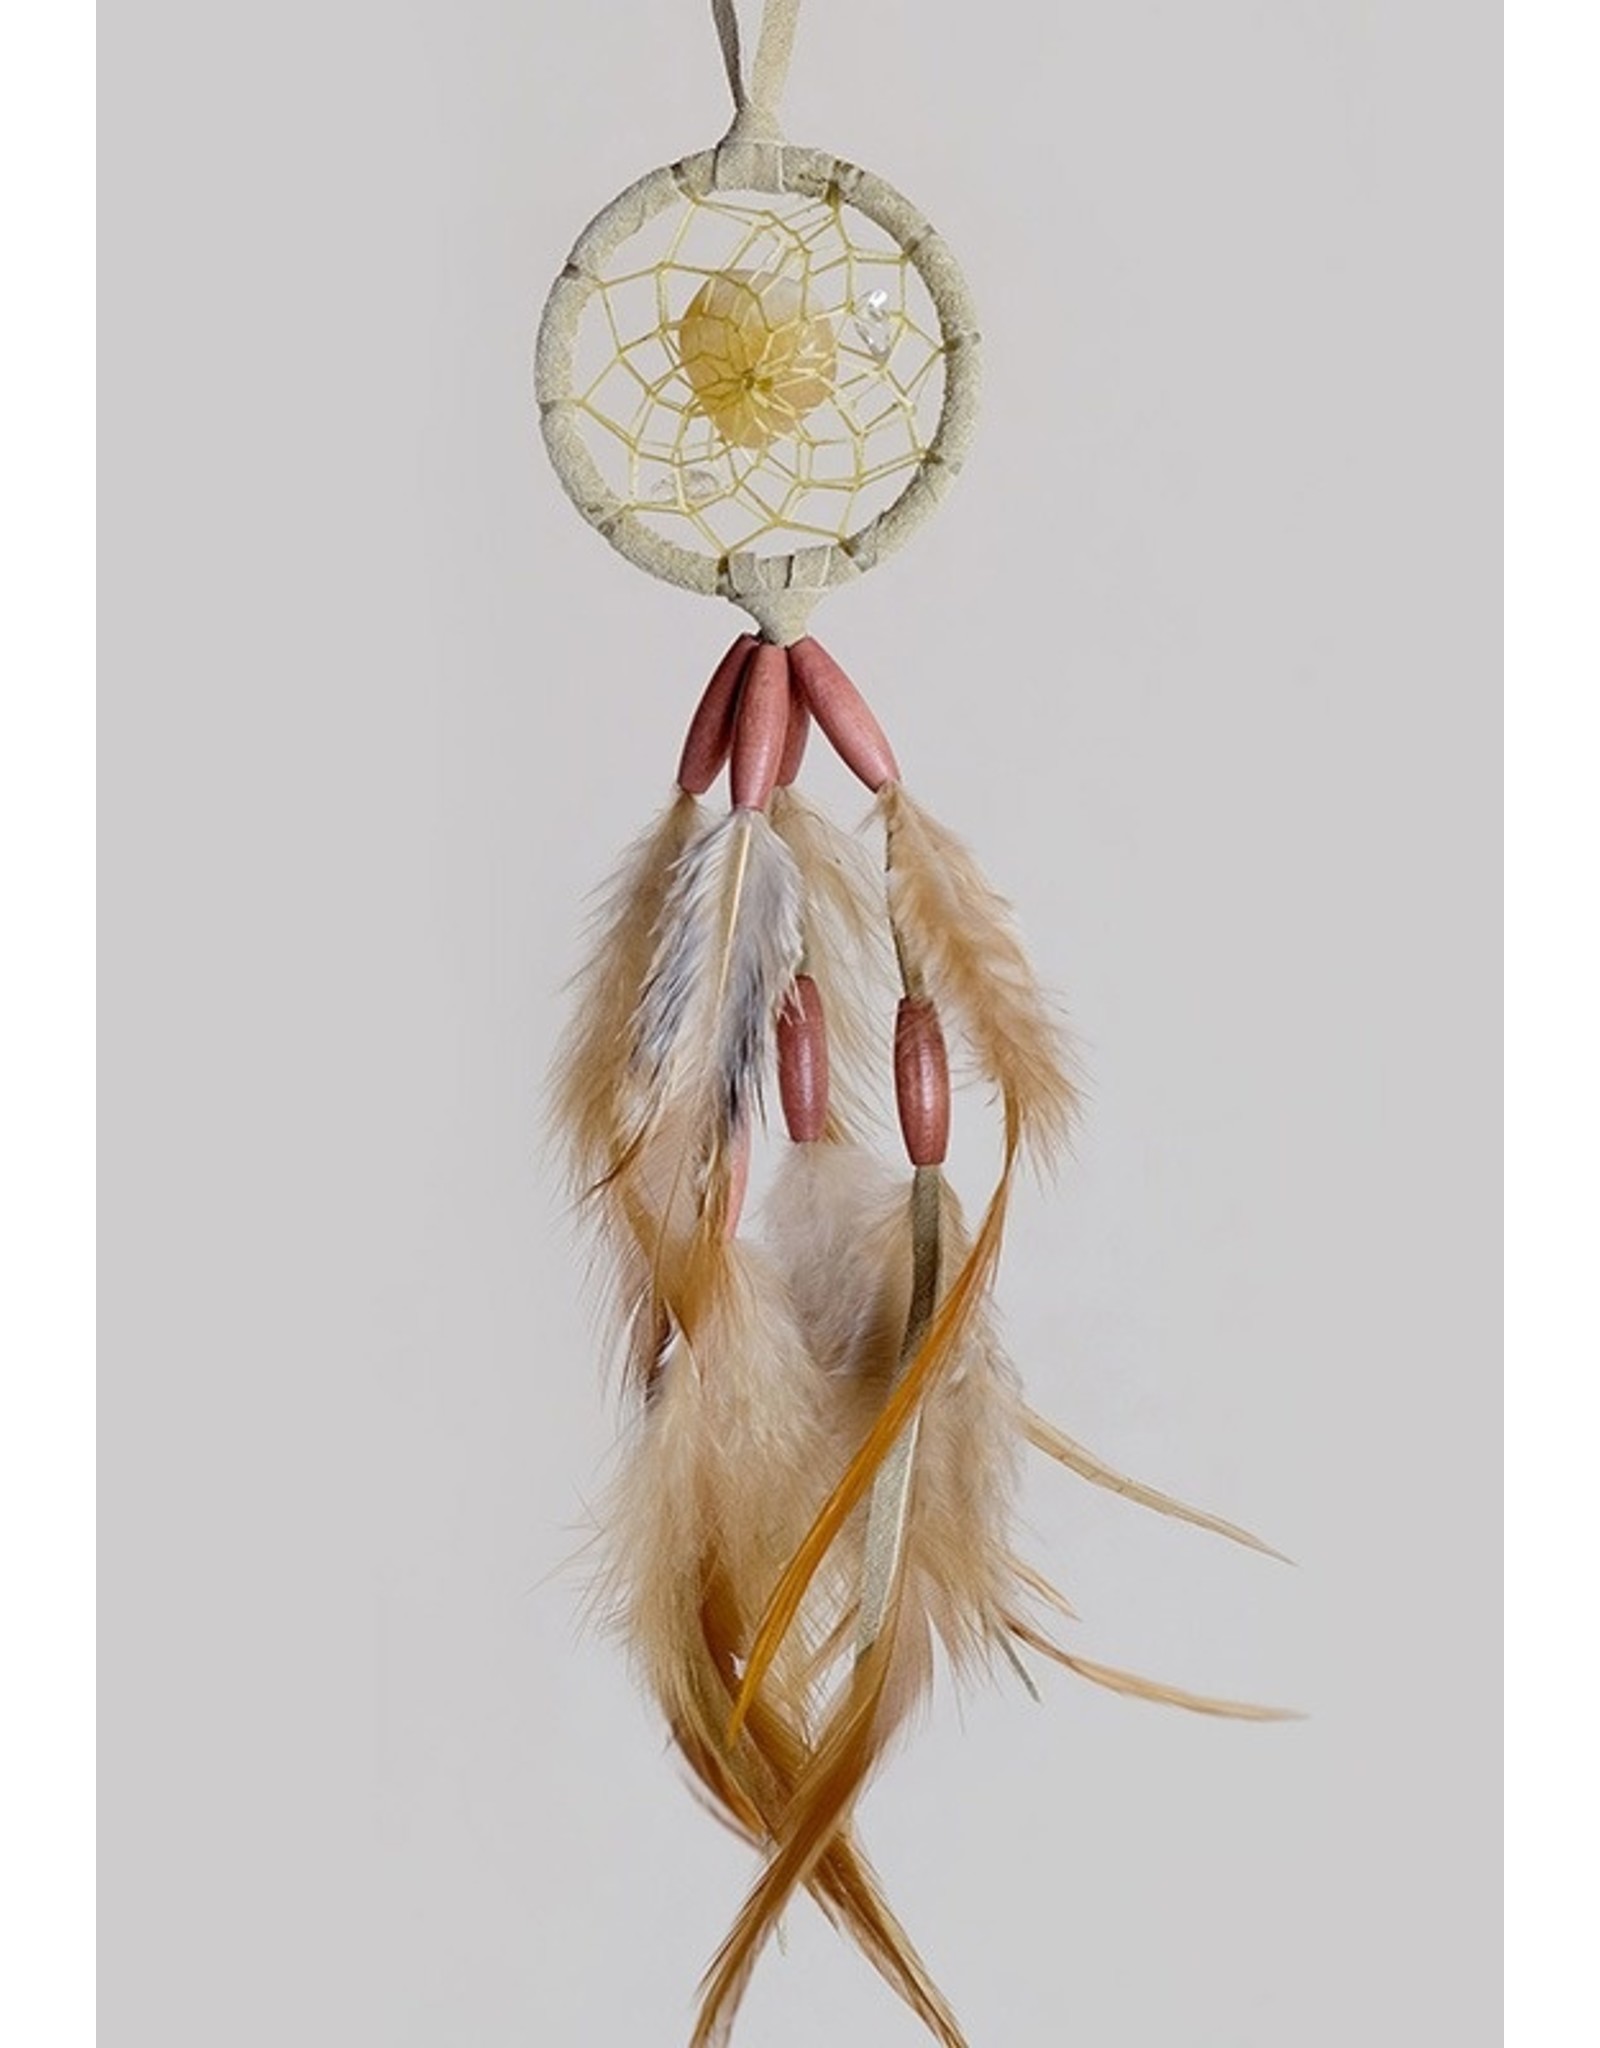 "Protect the Earth" Dream Catcher - DC809